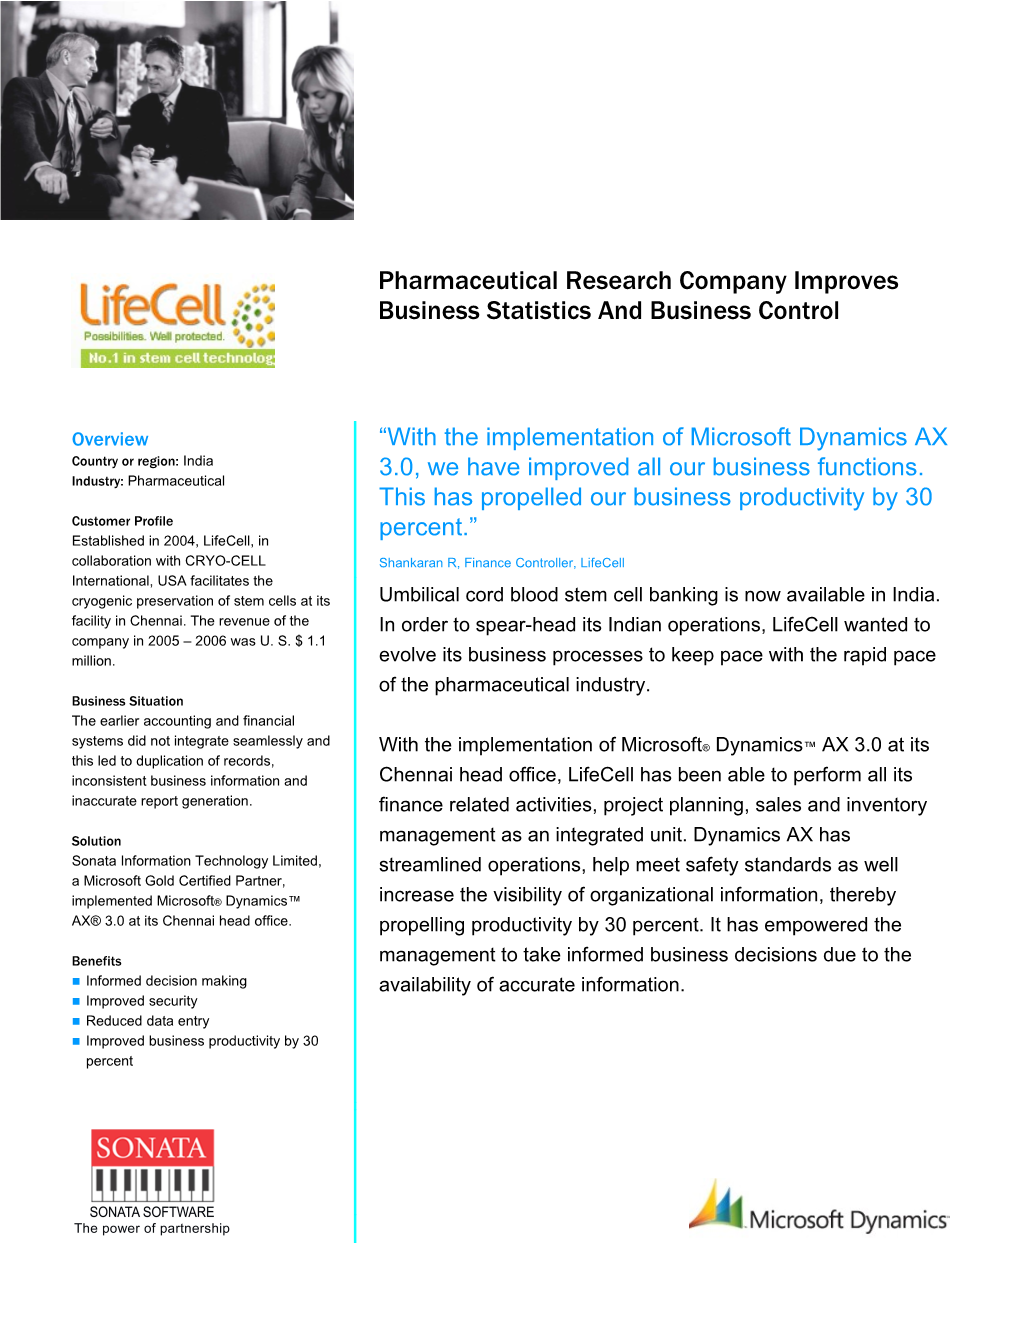 Lifecell's Collaborator CRYO-CELL International Inc. Is the World's Largest and Oldest